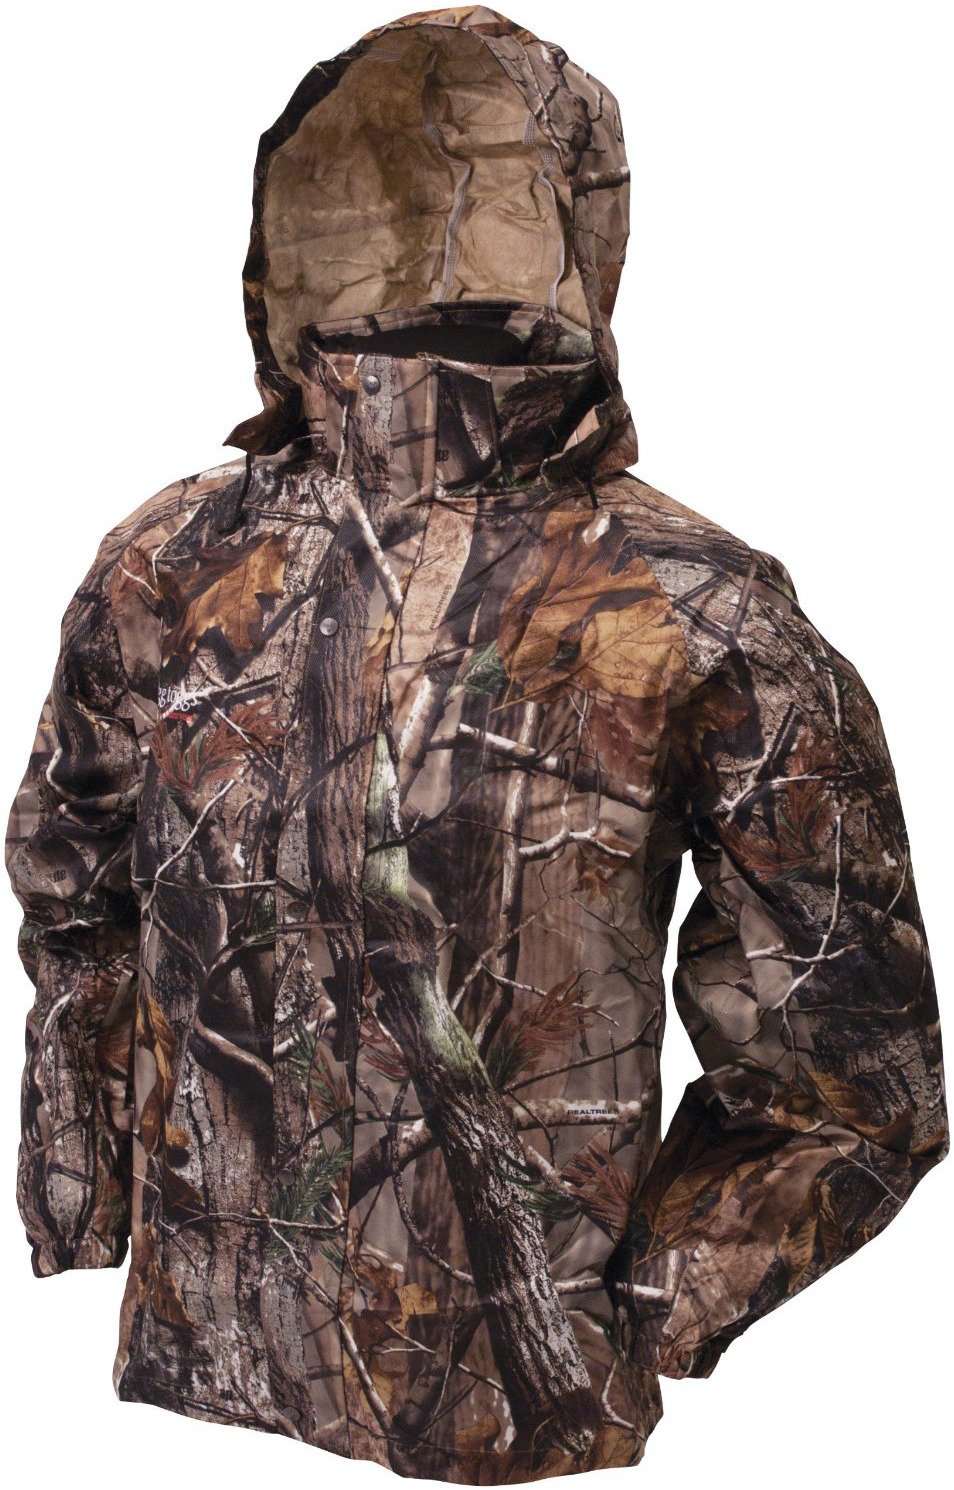 Frogg Toggs Adults' All Sports Realtree Xtra Camo Suit | Academy